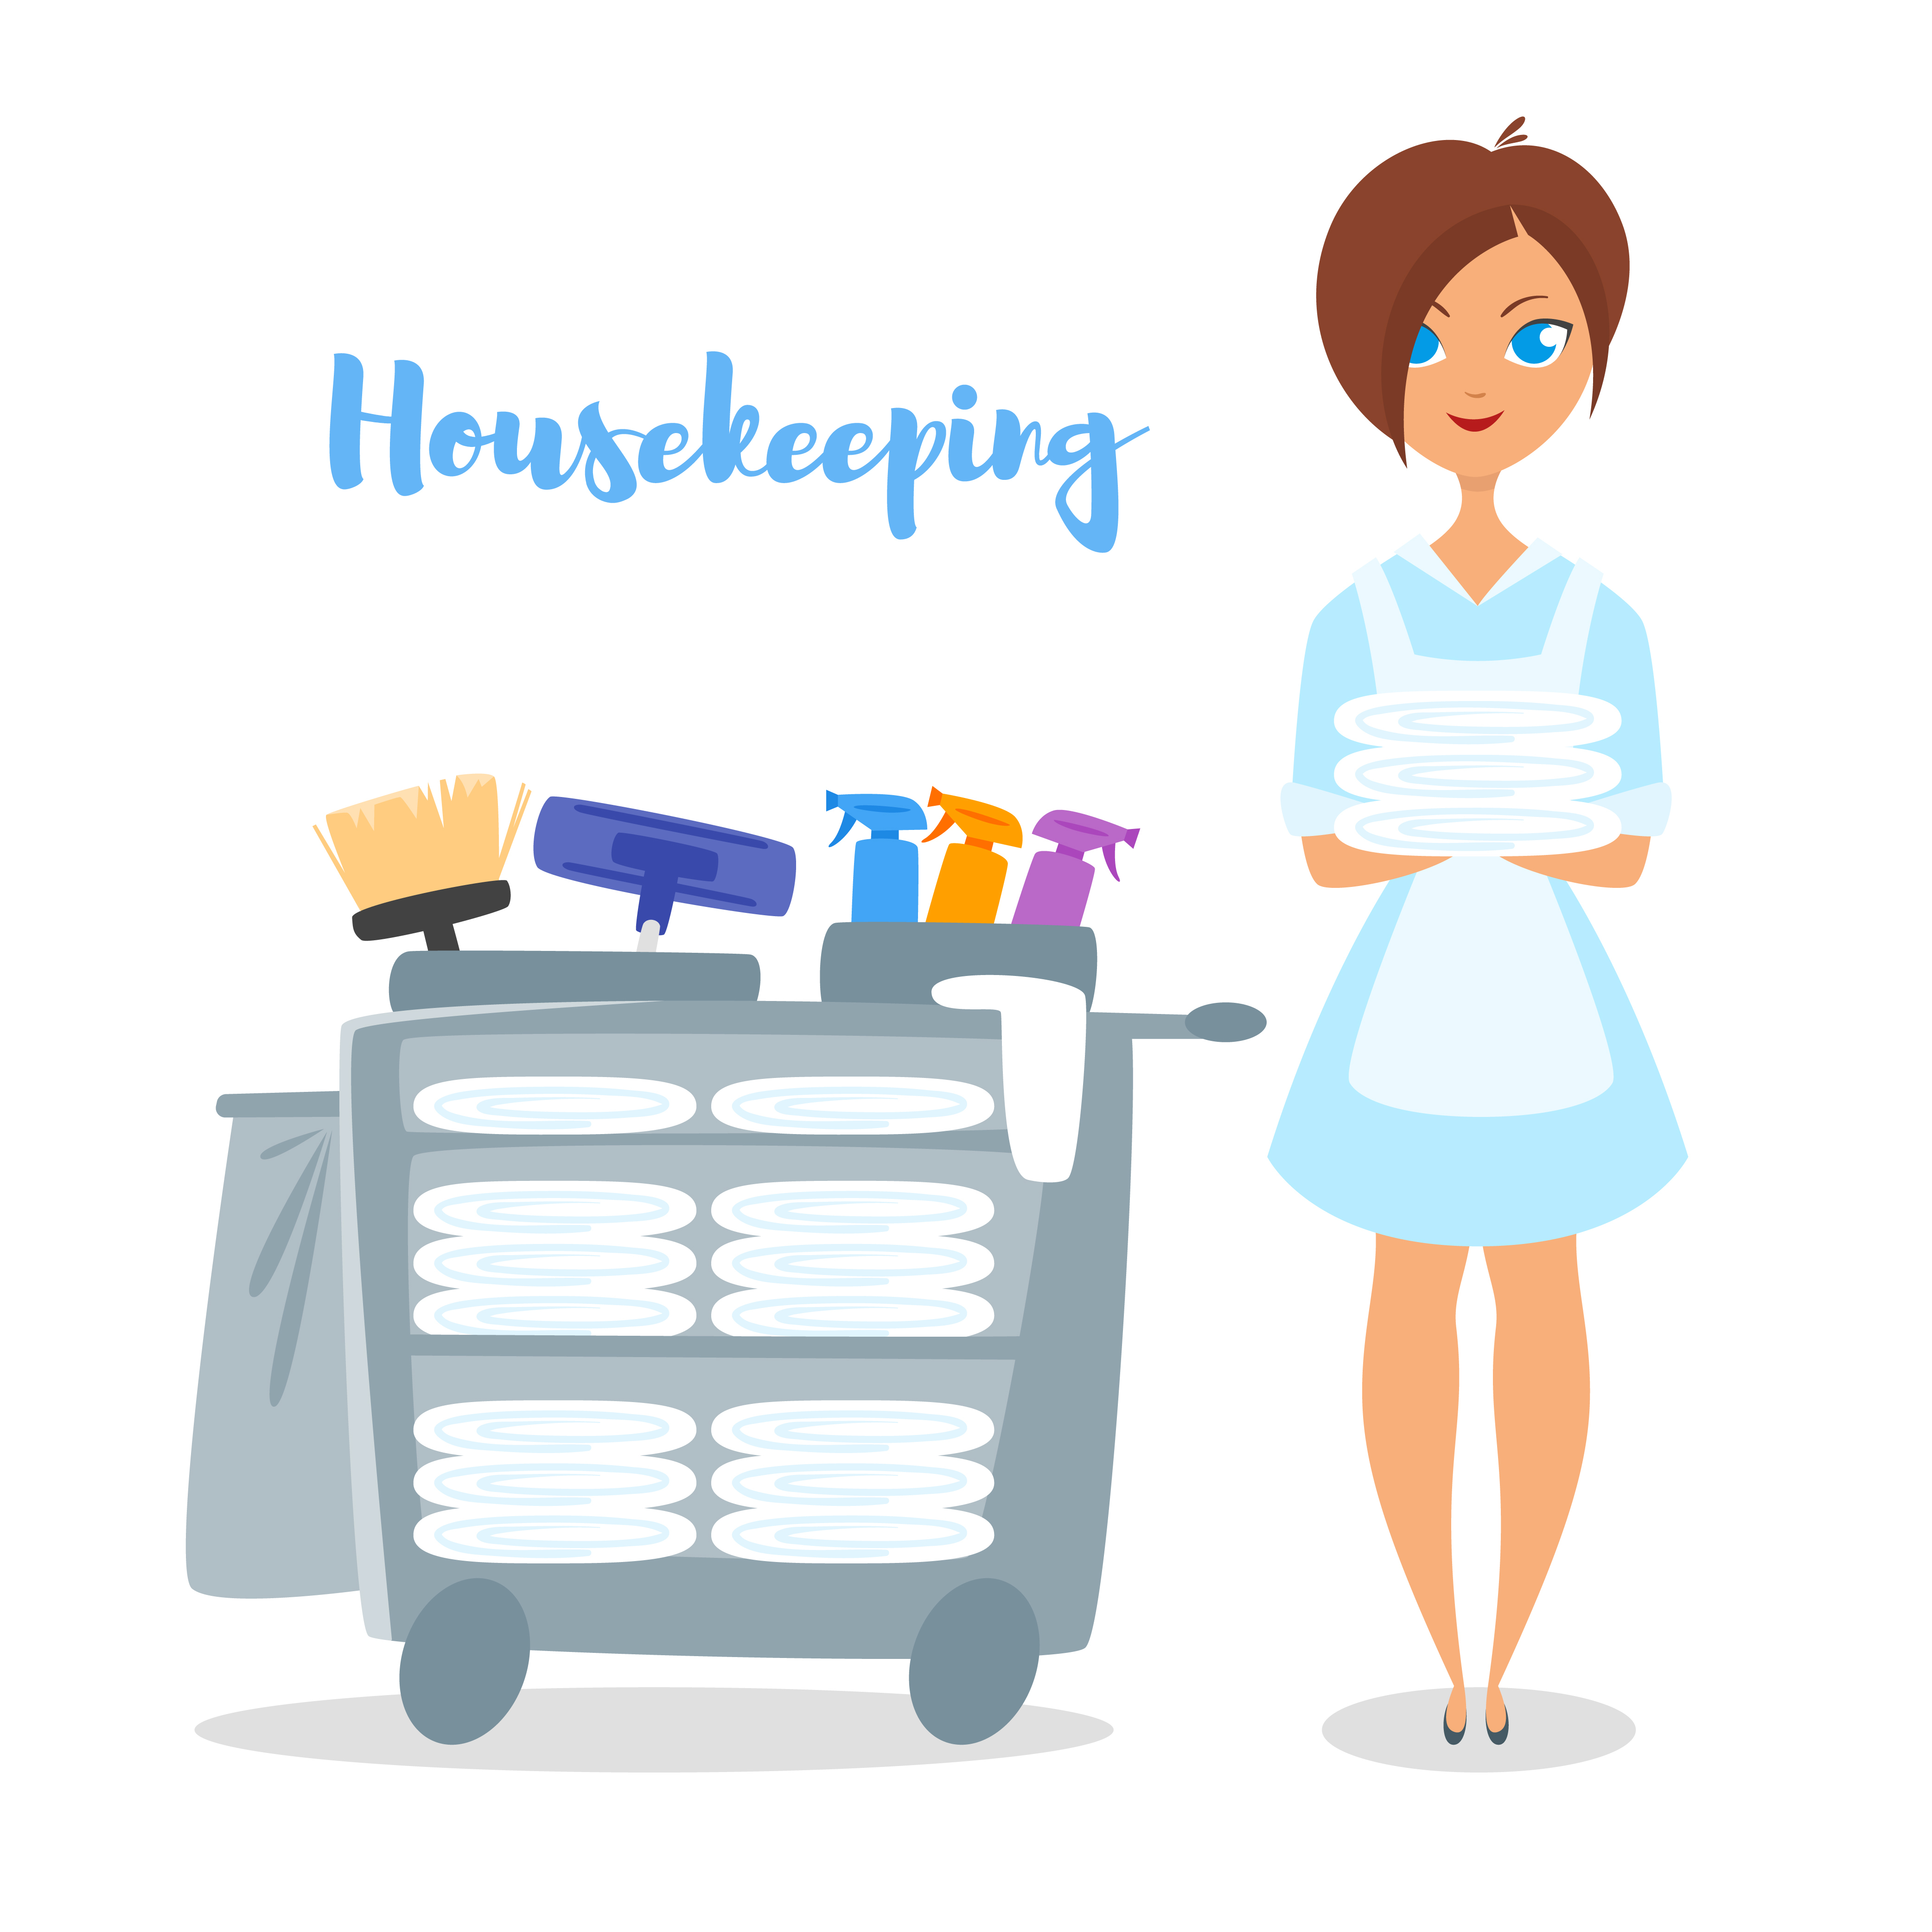 How Many Times Do You Need a Housekeeper per Month?